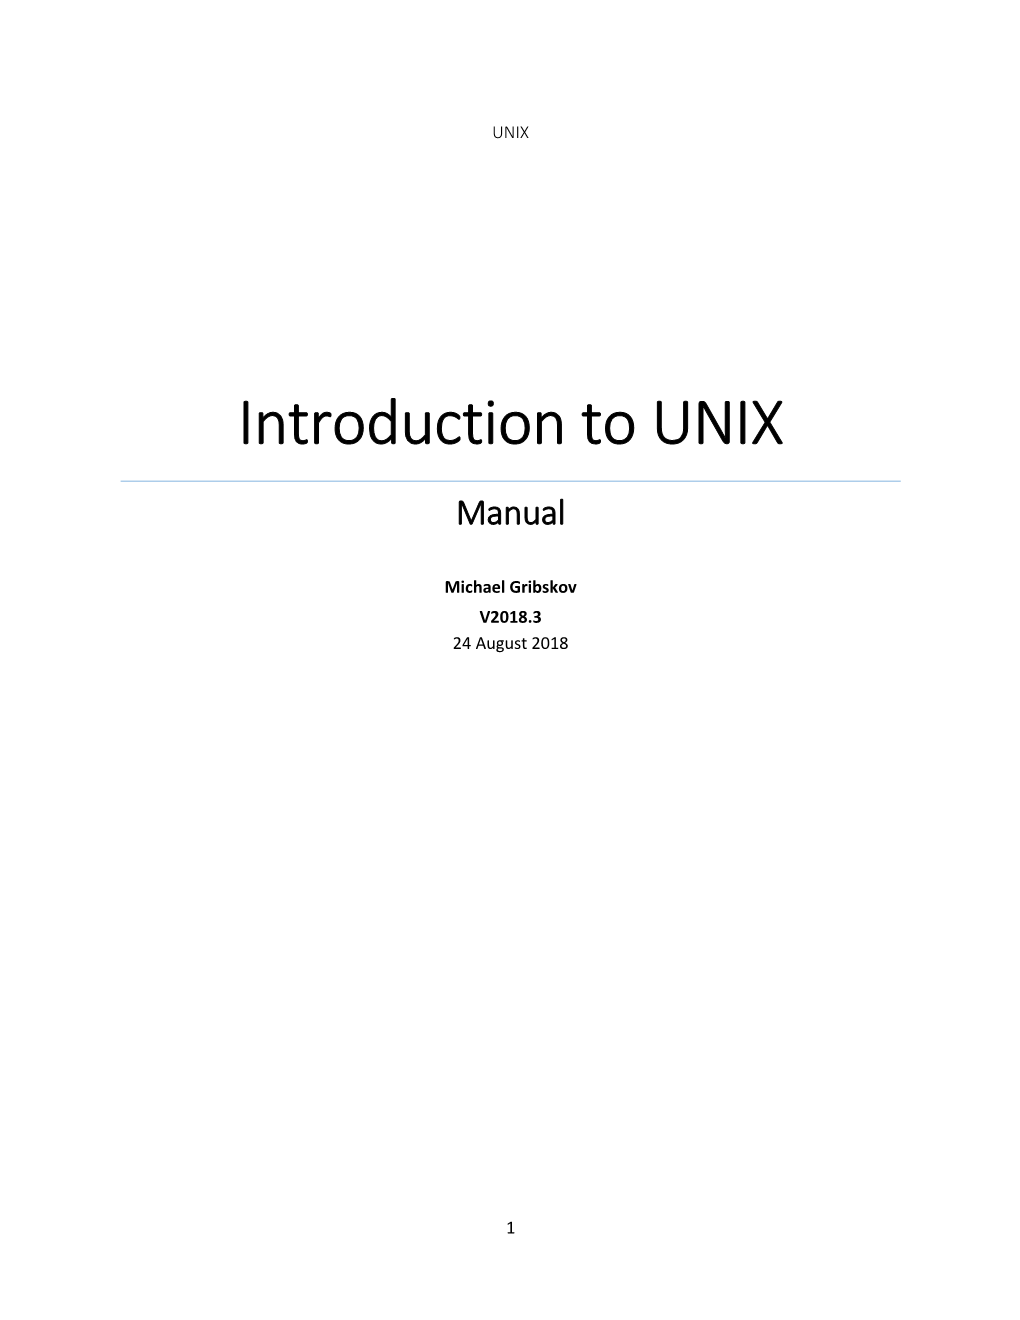 Introduction to UNIX Manual